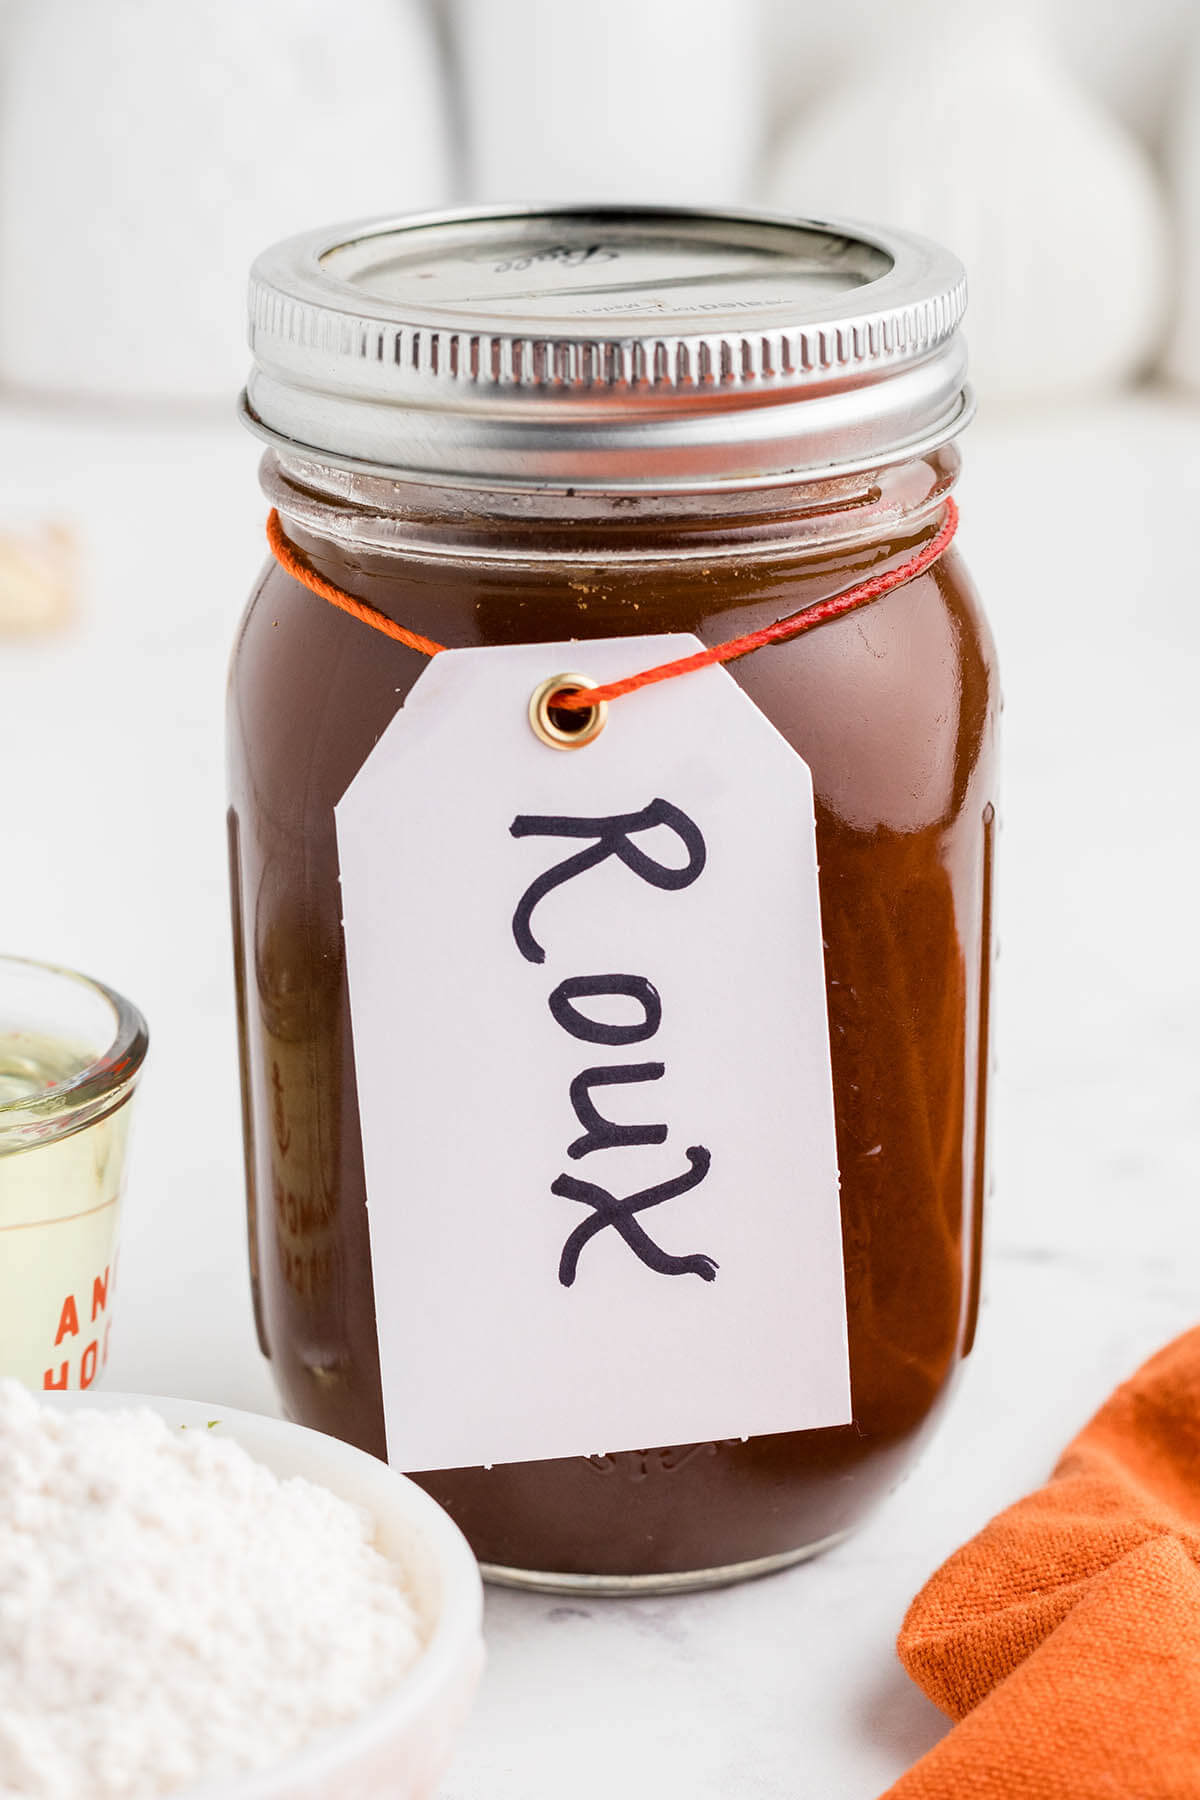 A mason jar filled with dark roux. The jar is labeled as Roux.